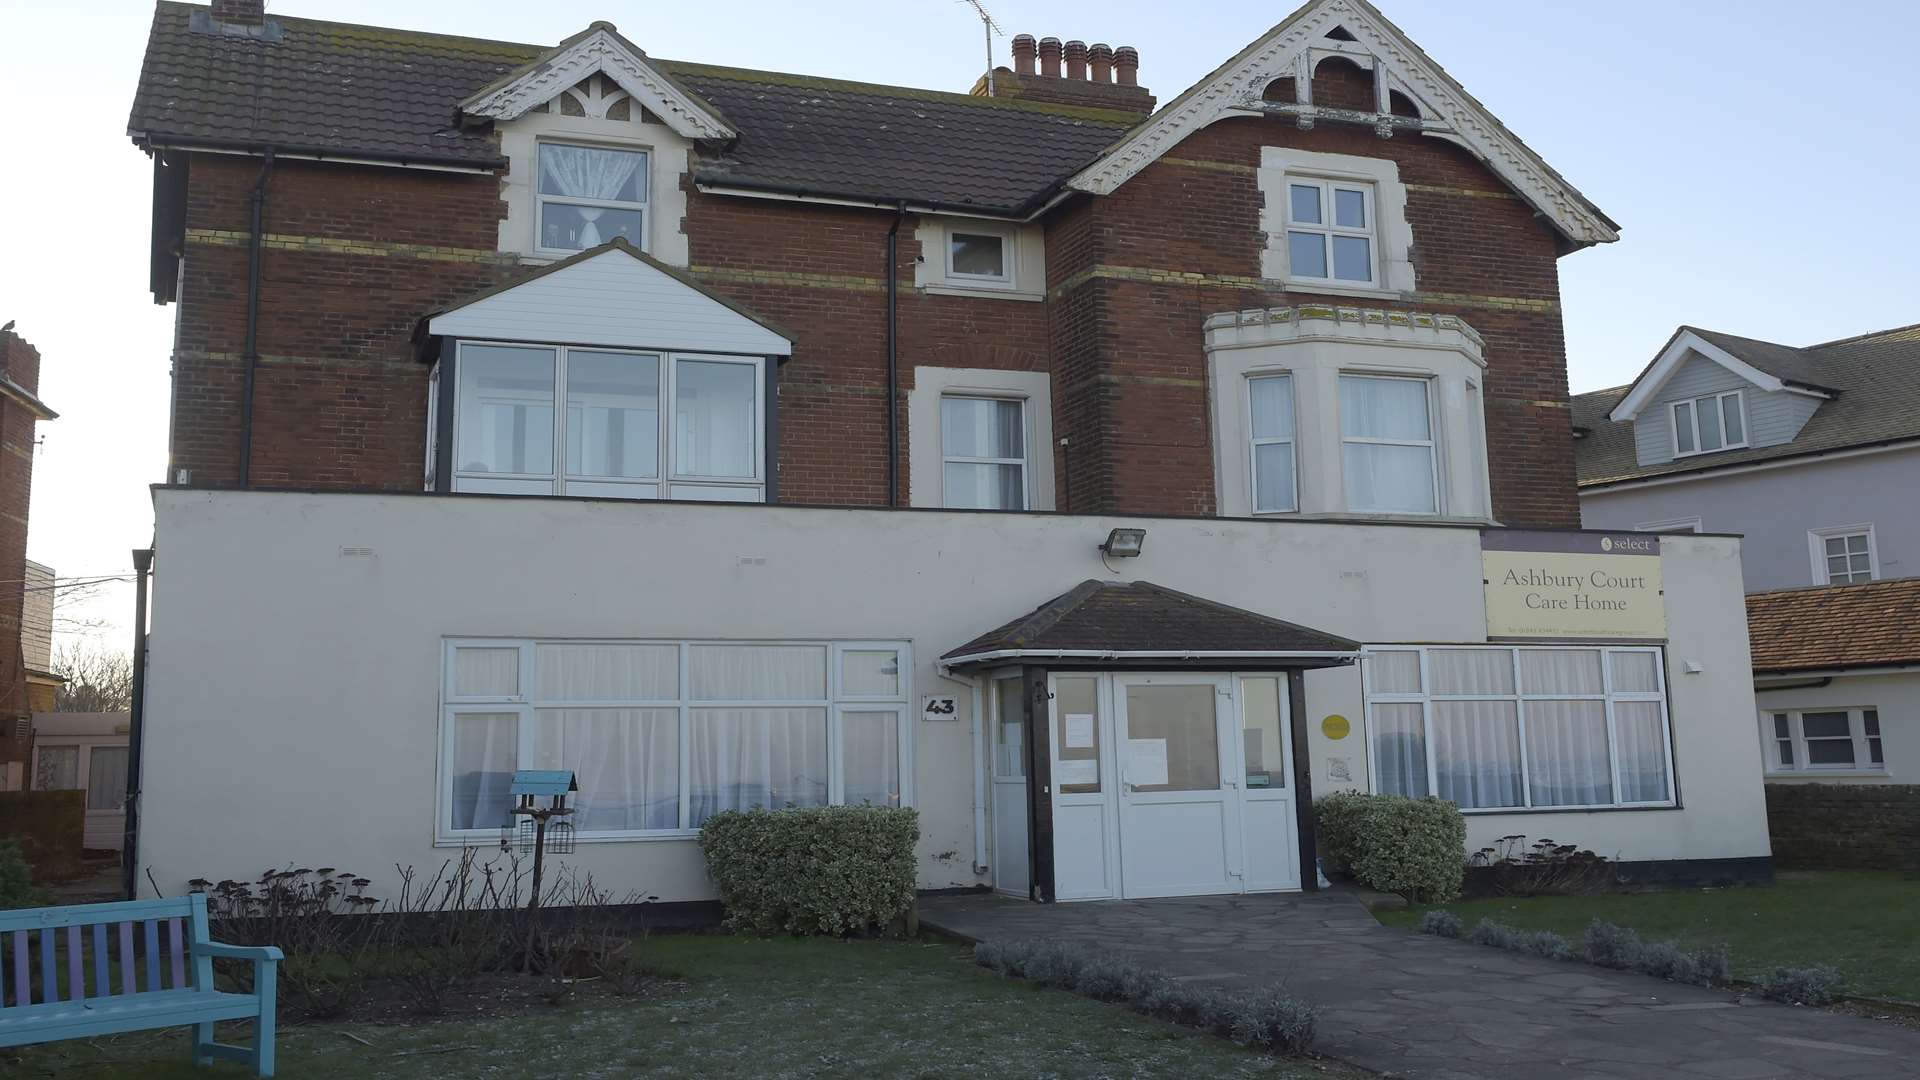 Ashbury Court care home has been put into special measures